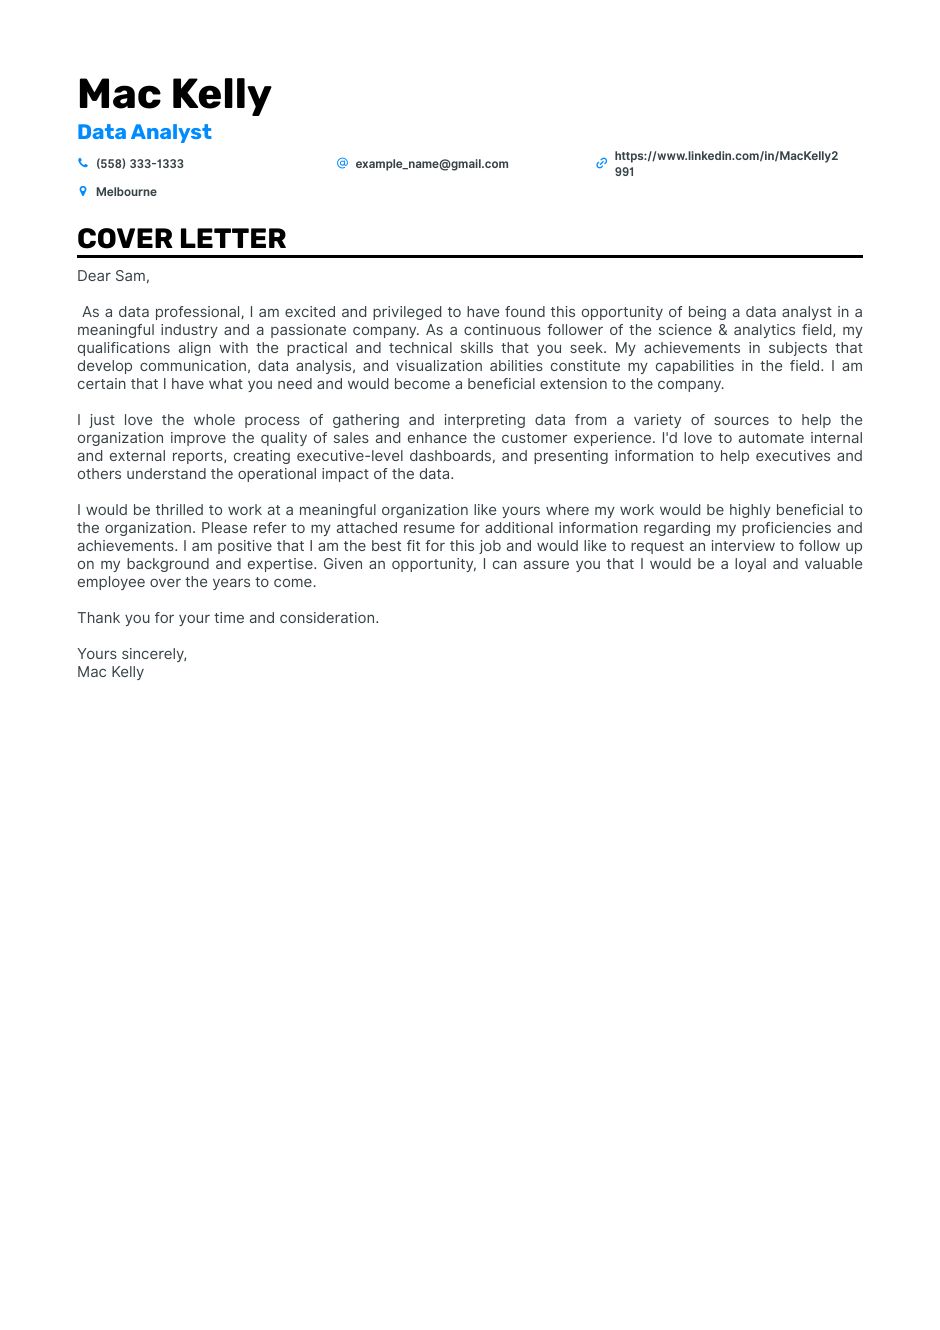 cover letter on data analyst